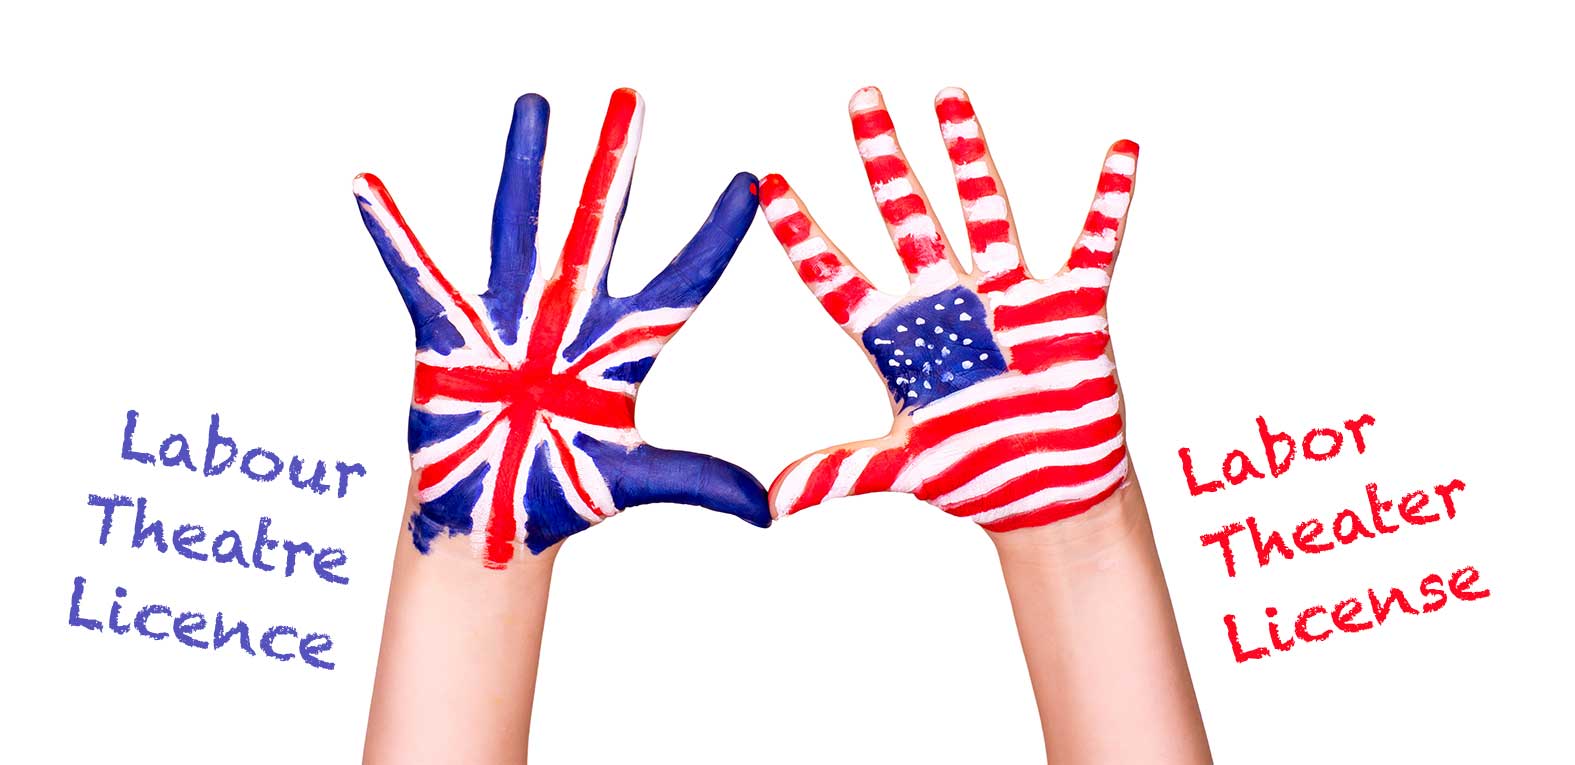 differences between British English and American English